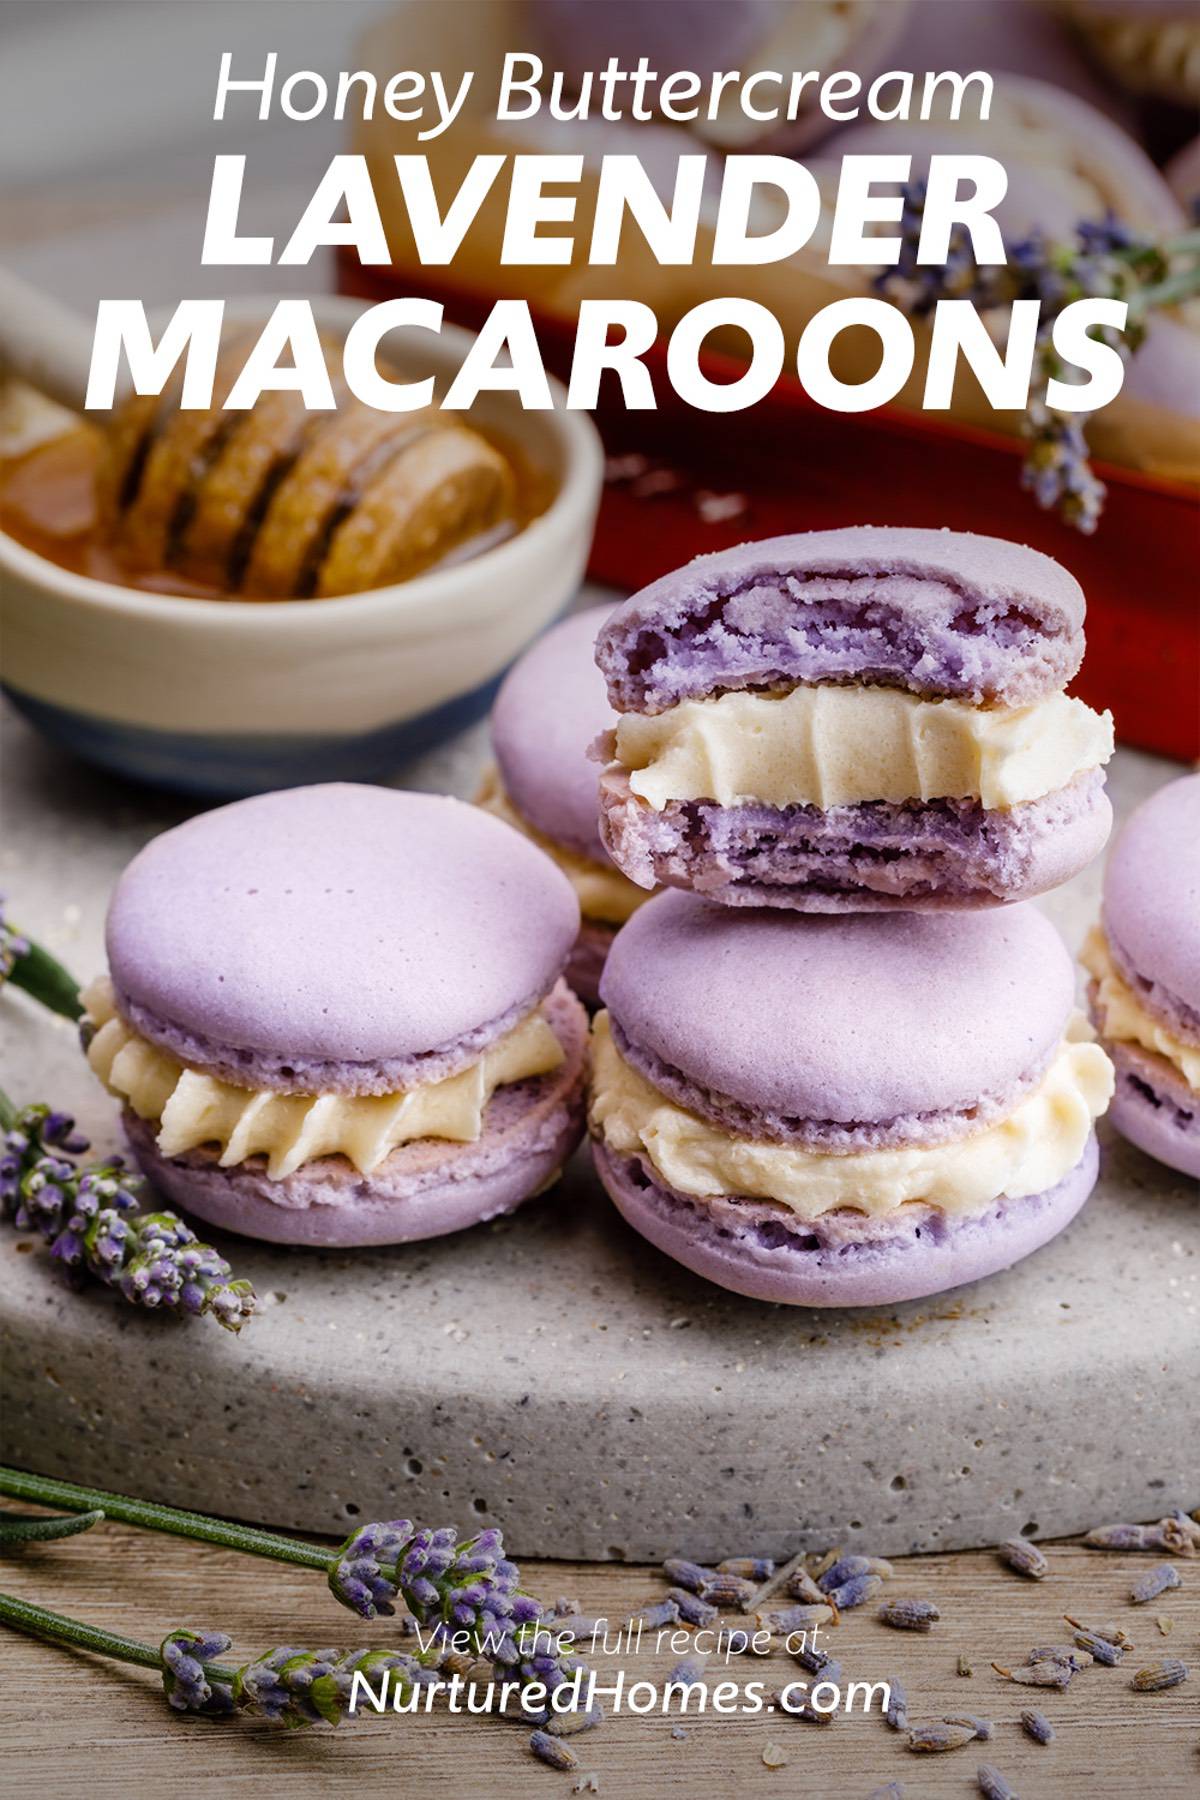 Incredible Lavender Macaroons with Homemade Honey Buttercream